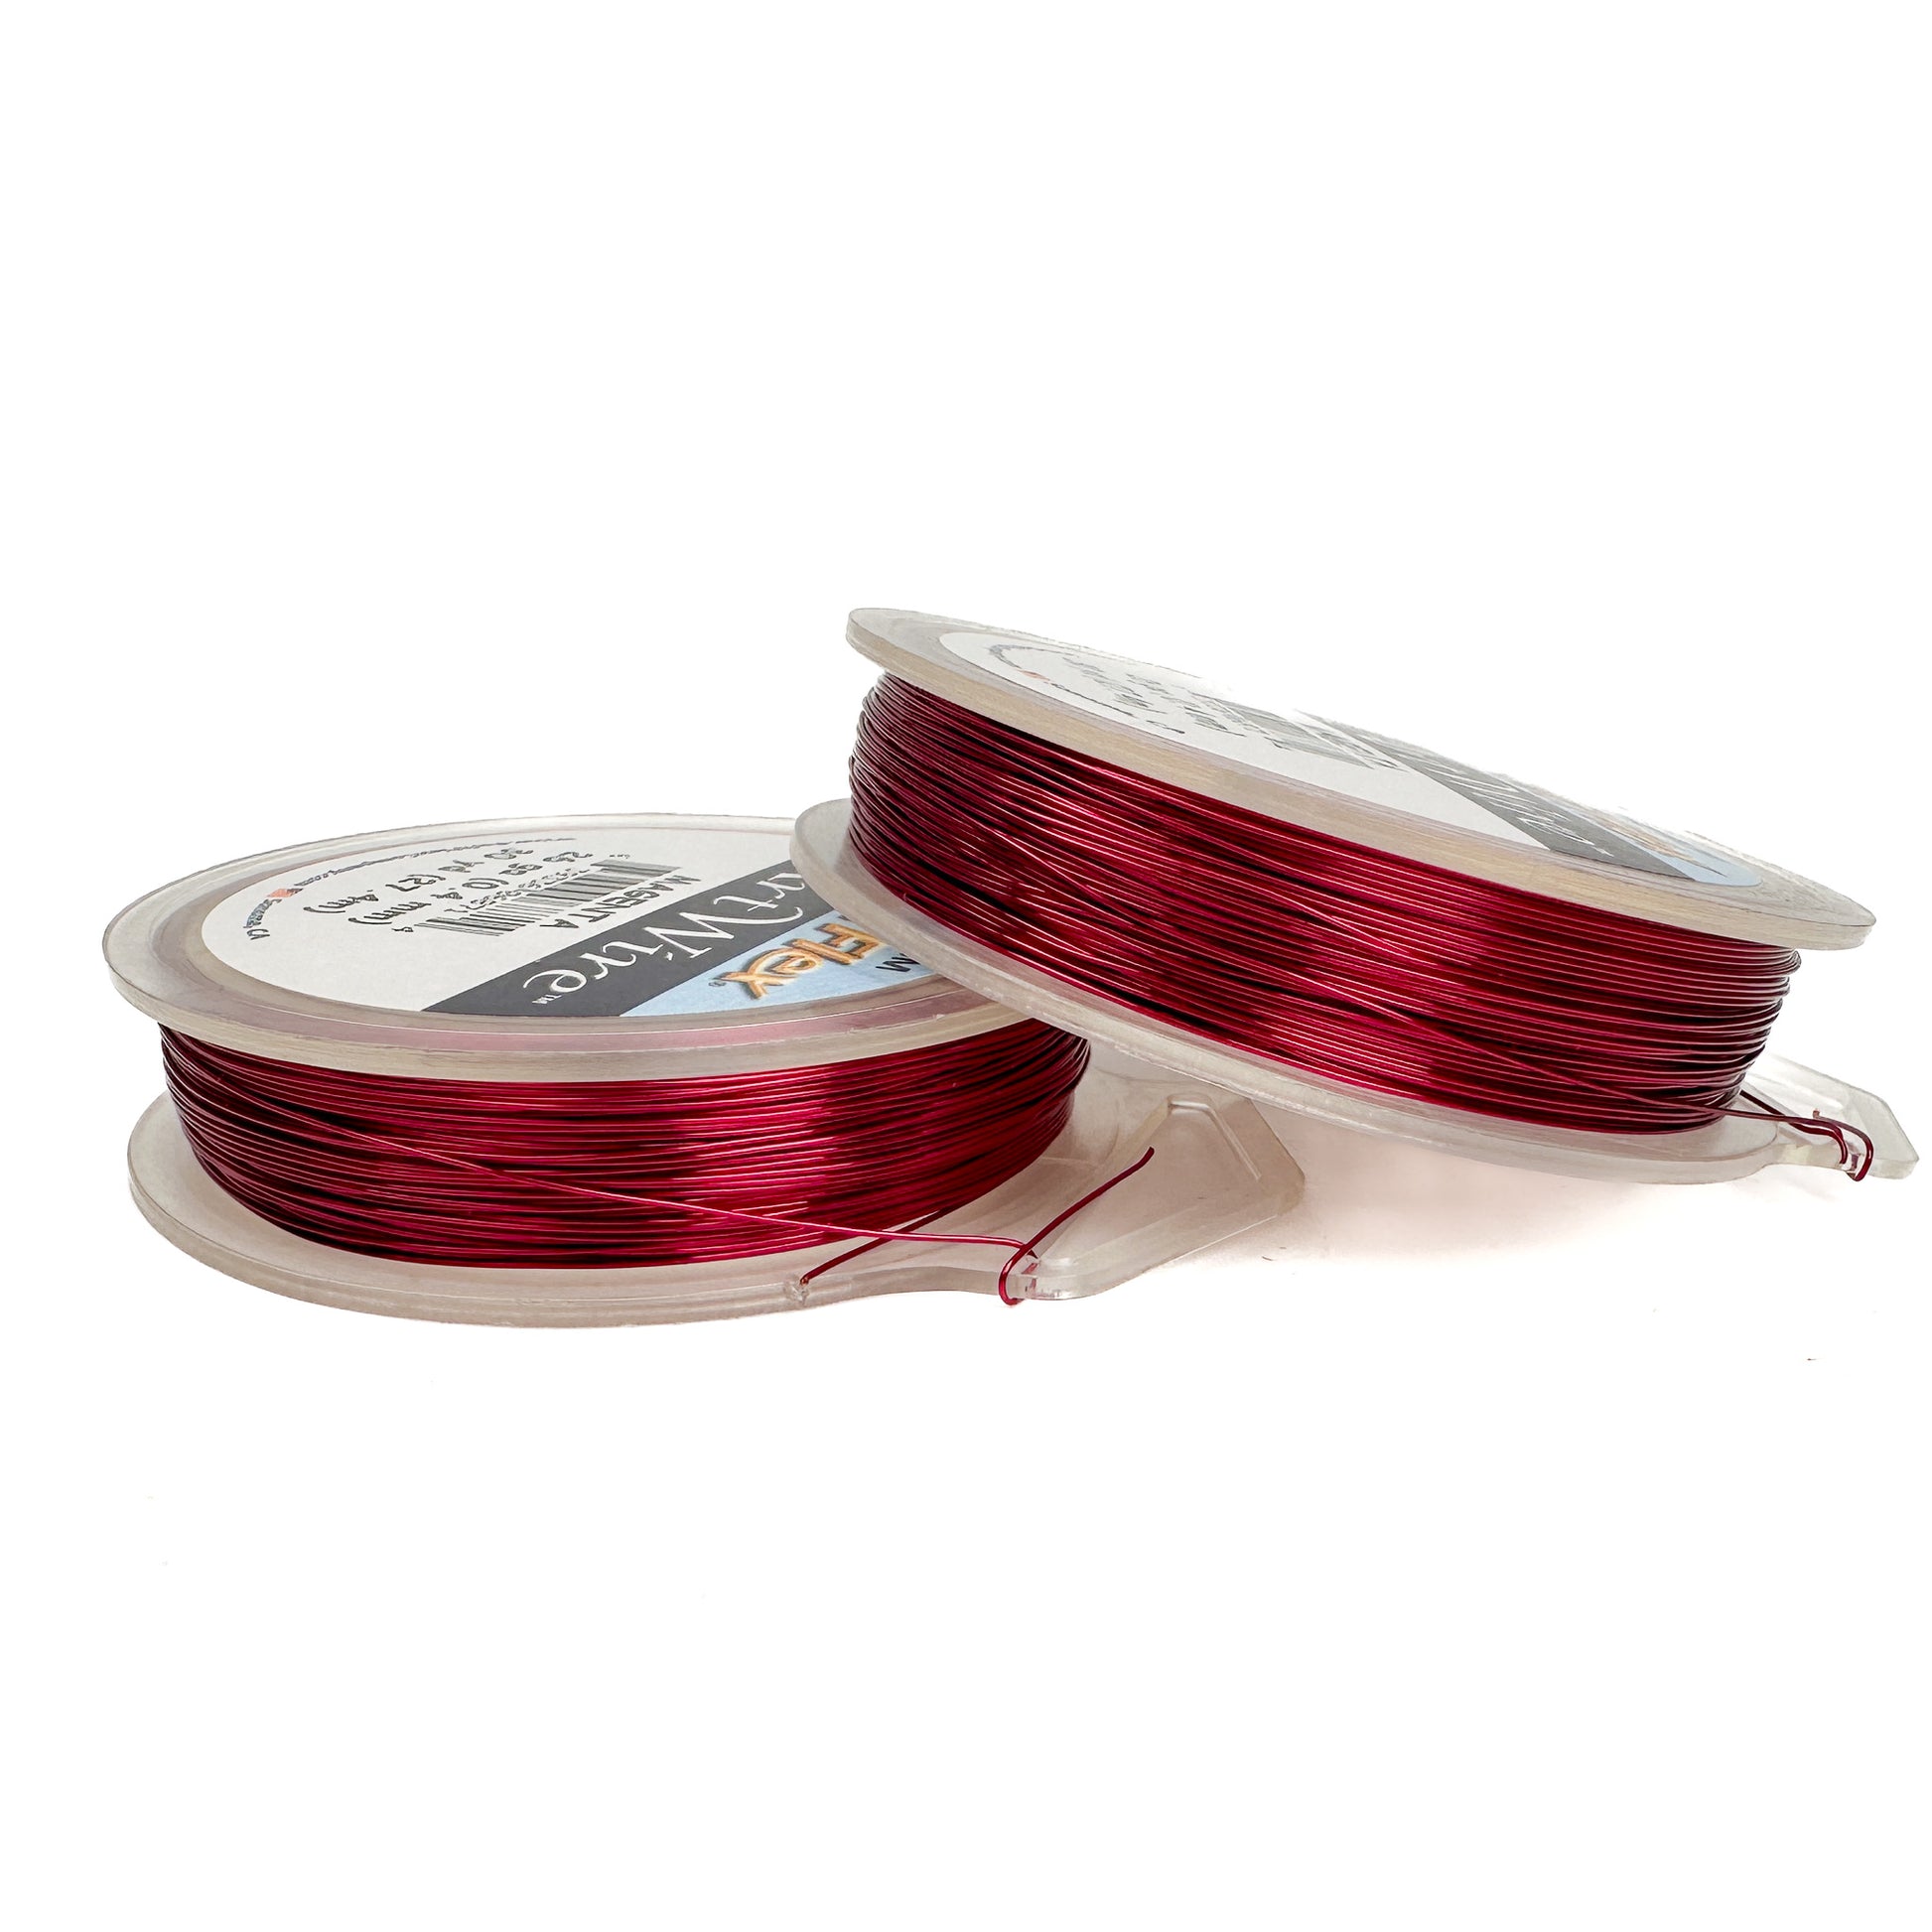 26 Gauge Colored Craft Wire (2 Color Options)-The Bead Gallery Honolulu